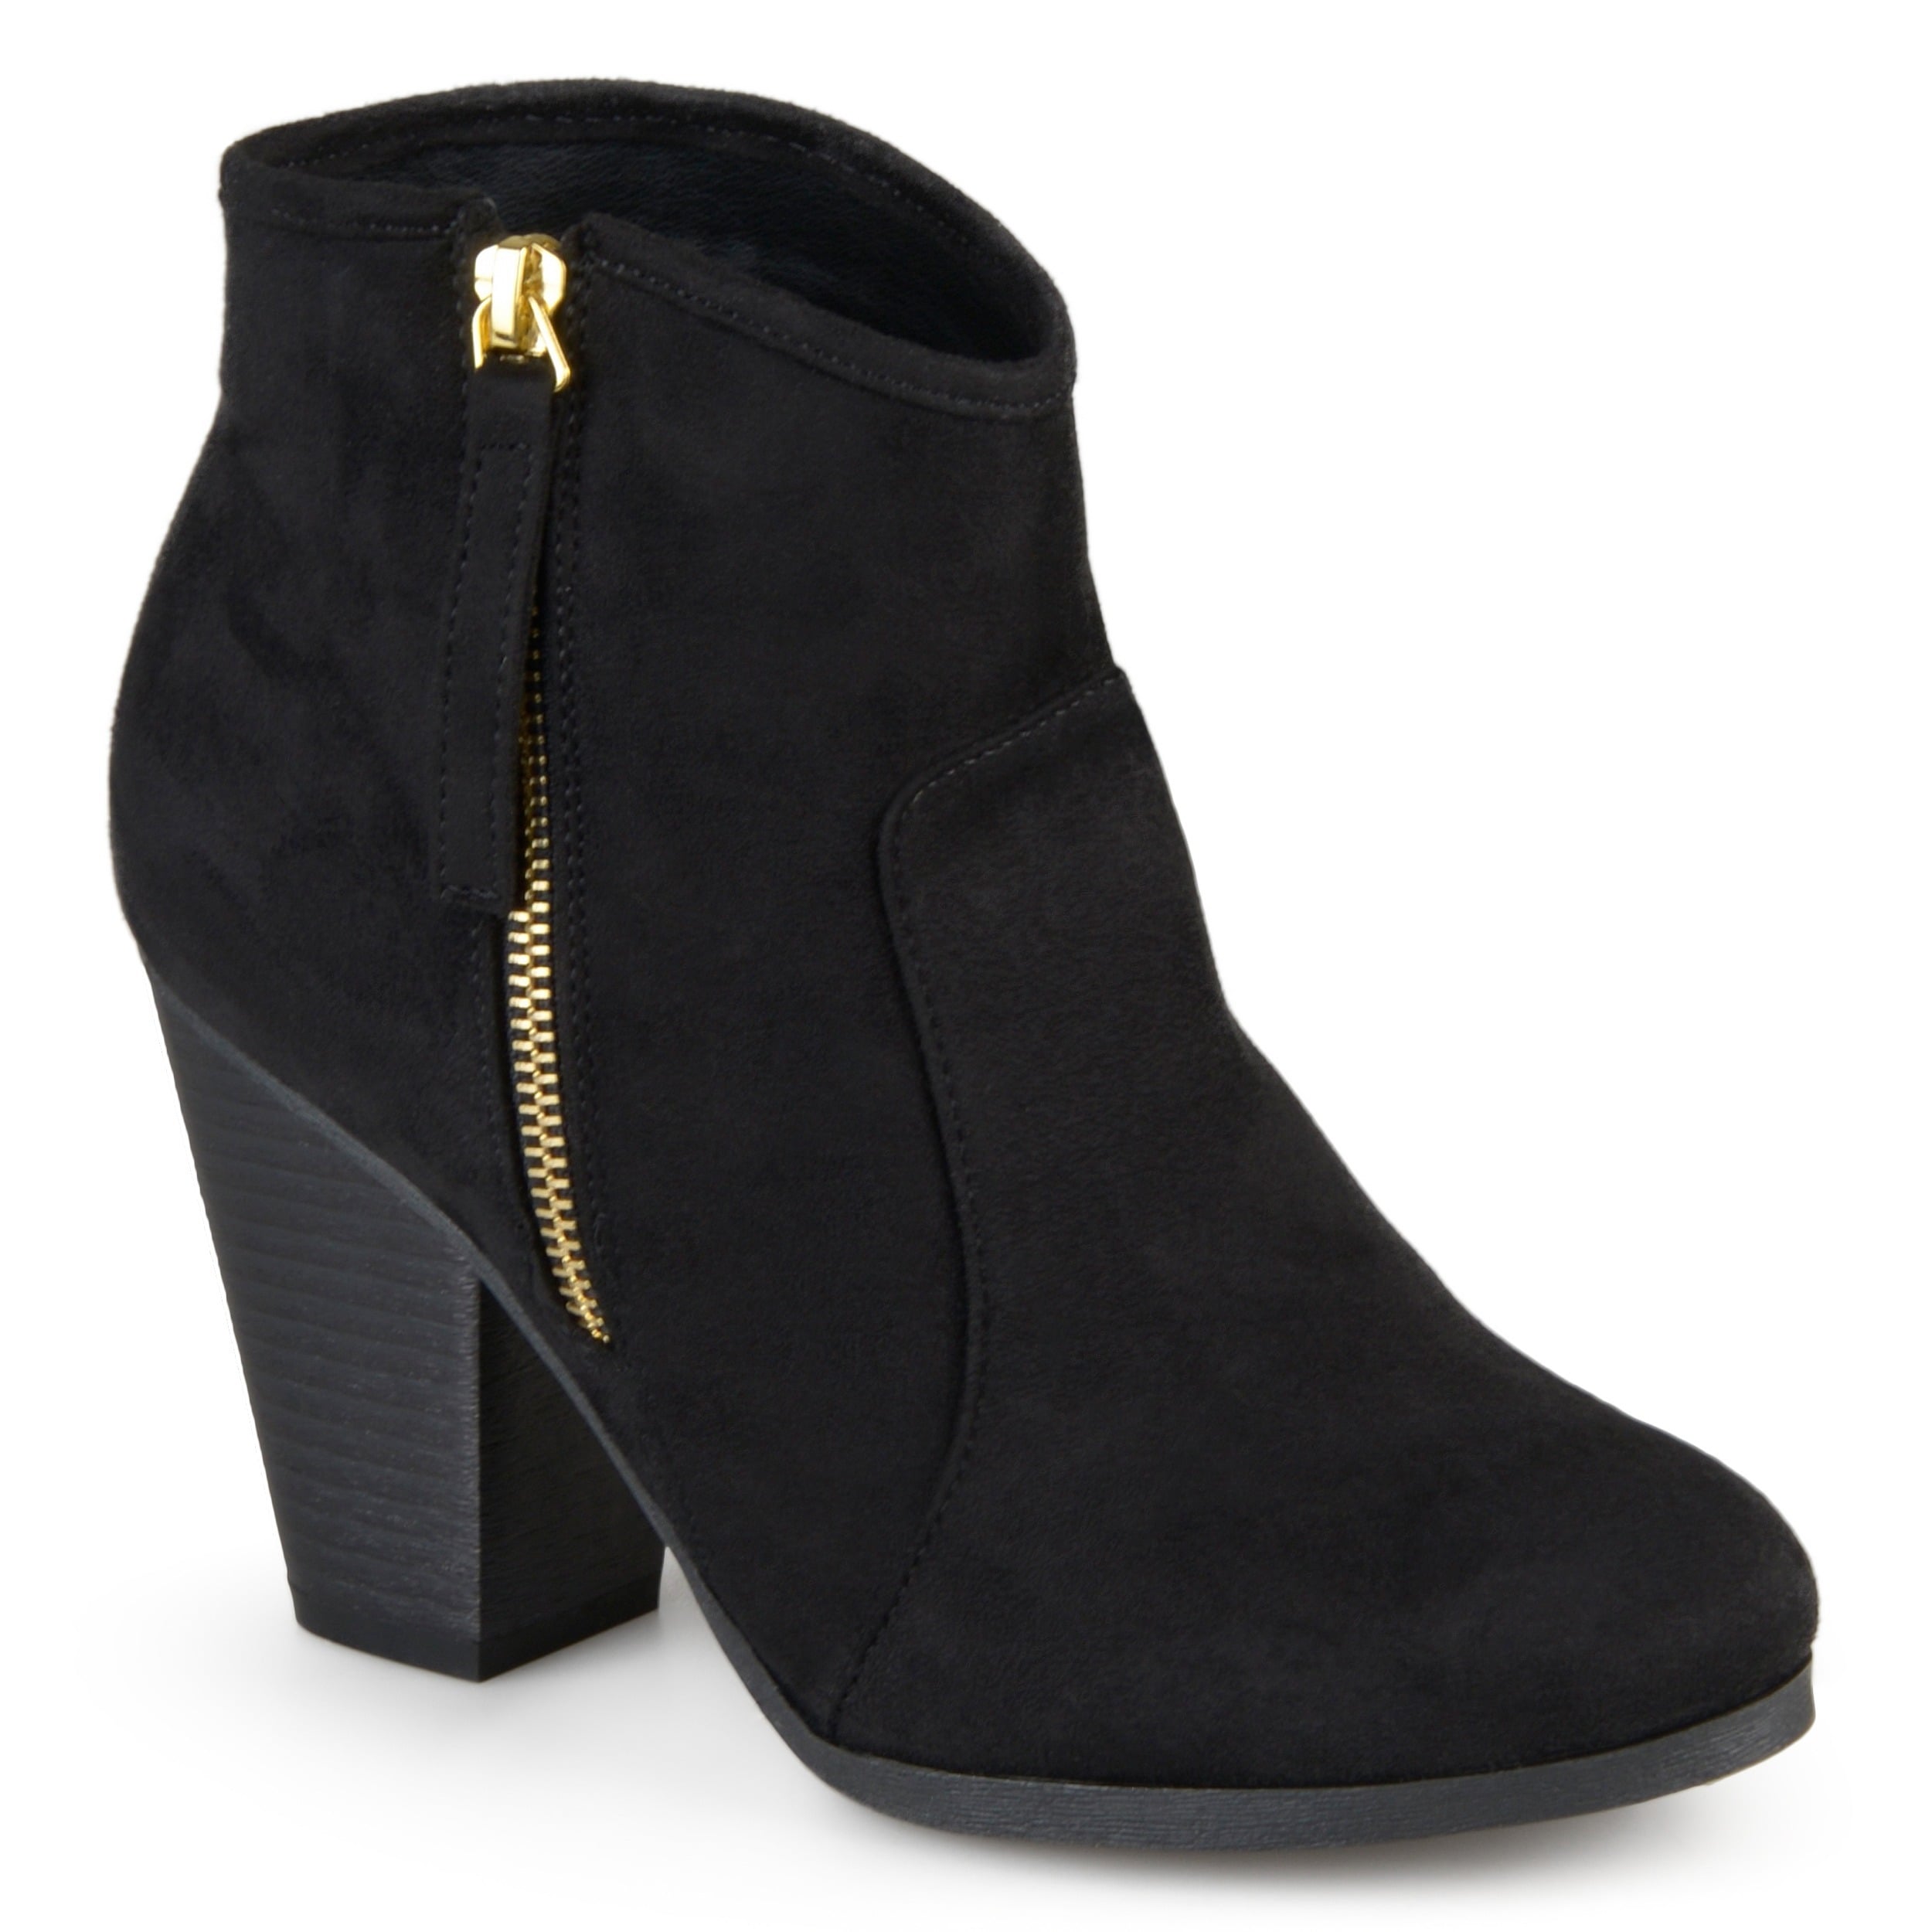 black ankle booties with heel